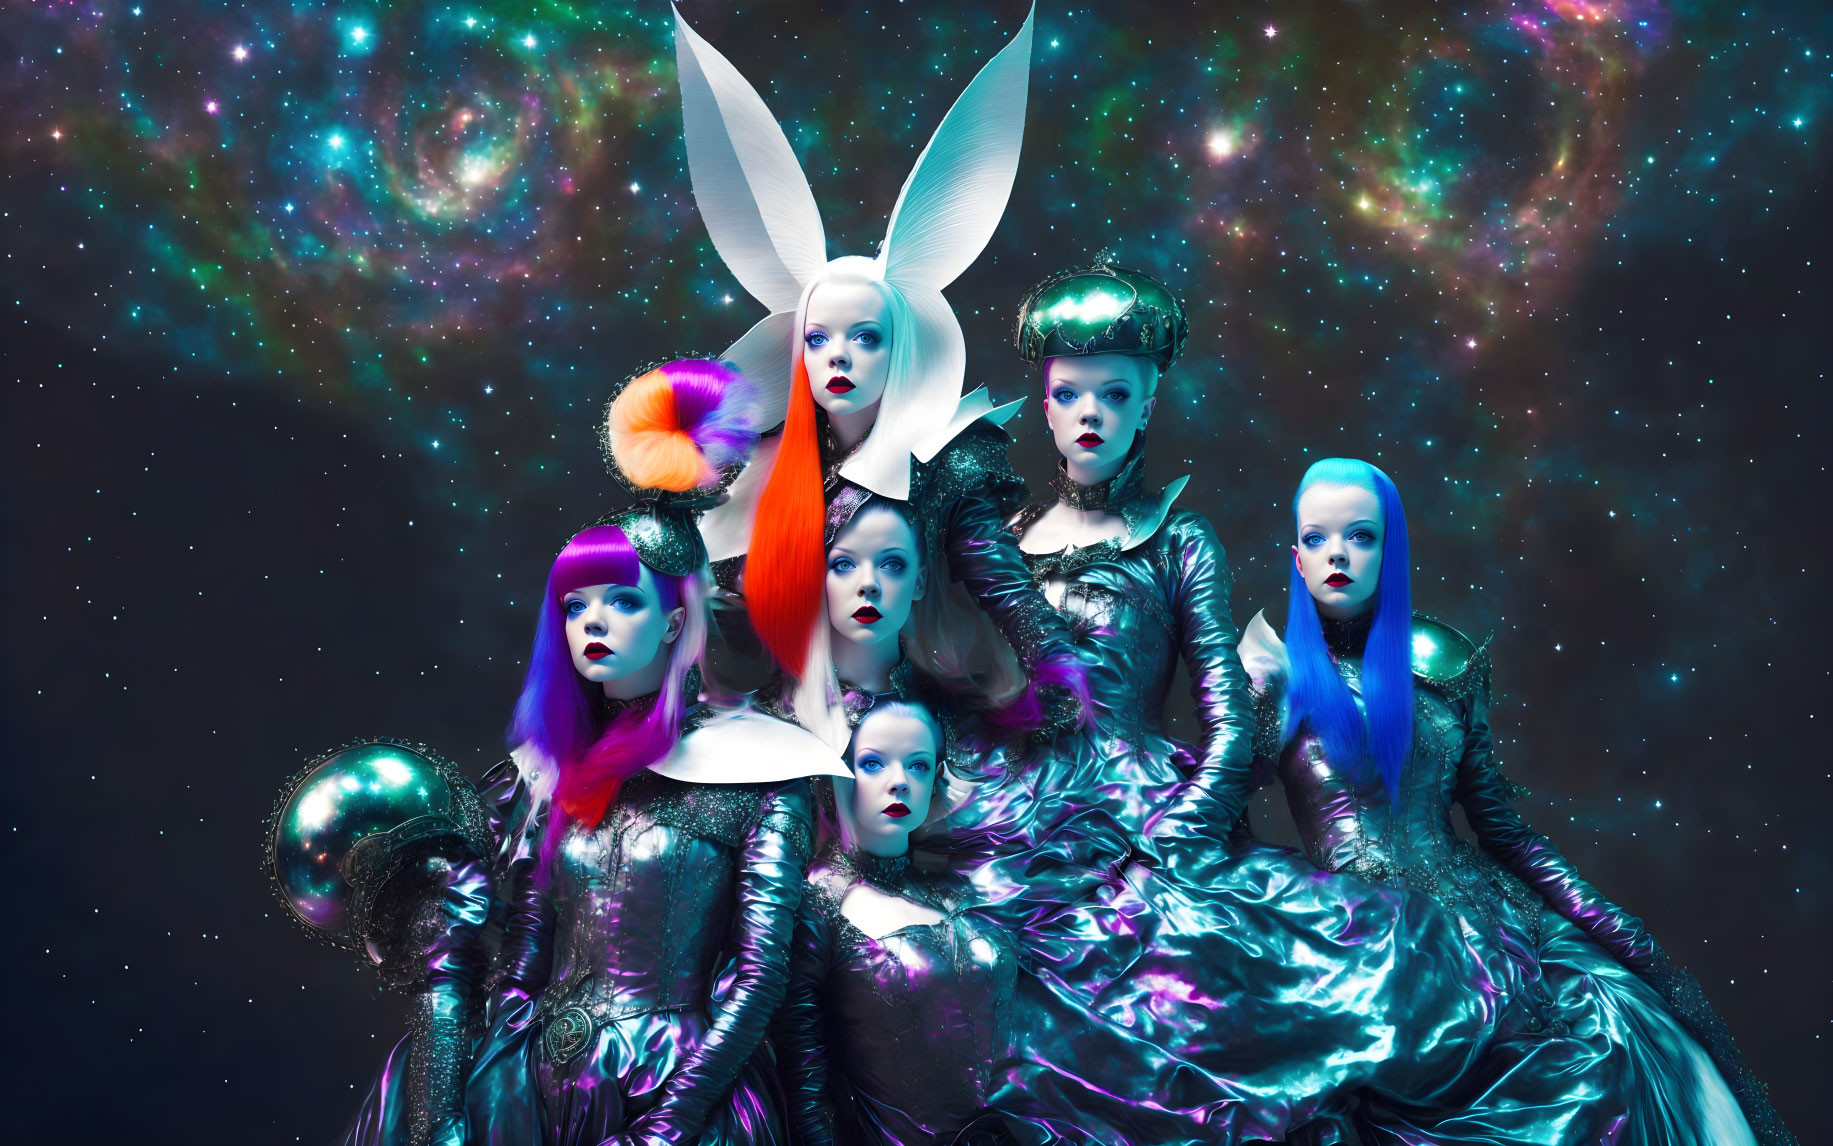 Five models in elaborate makeup and costumes on cosmic starry backdrop